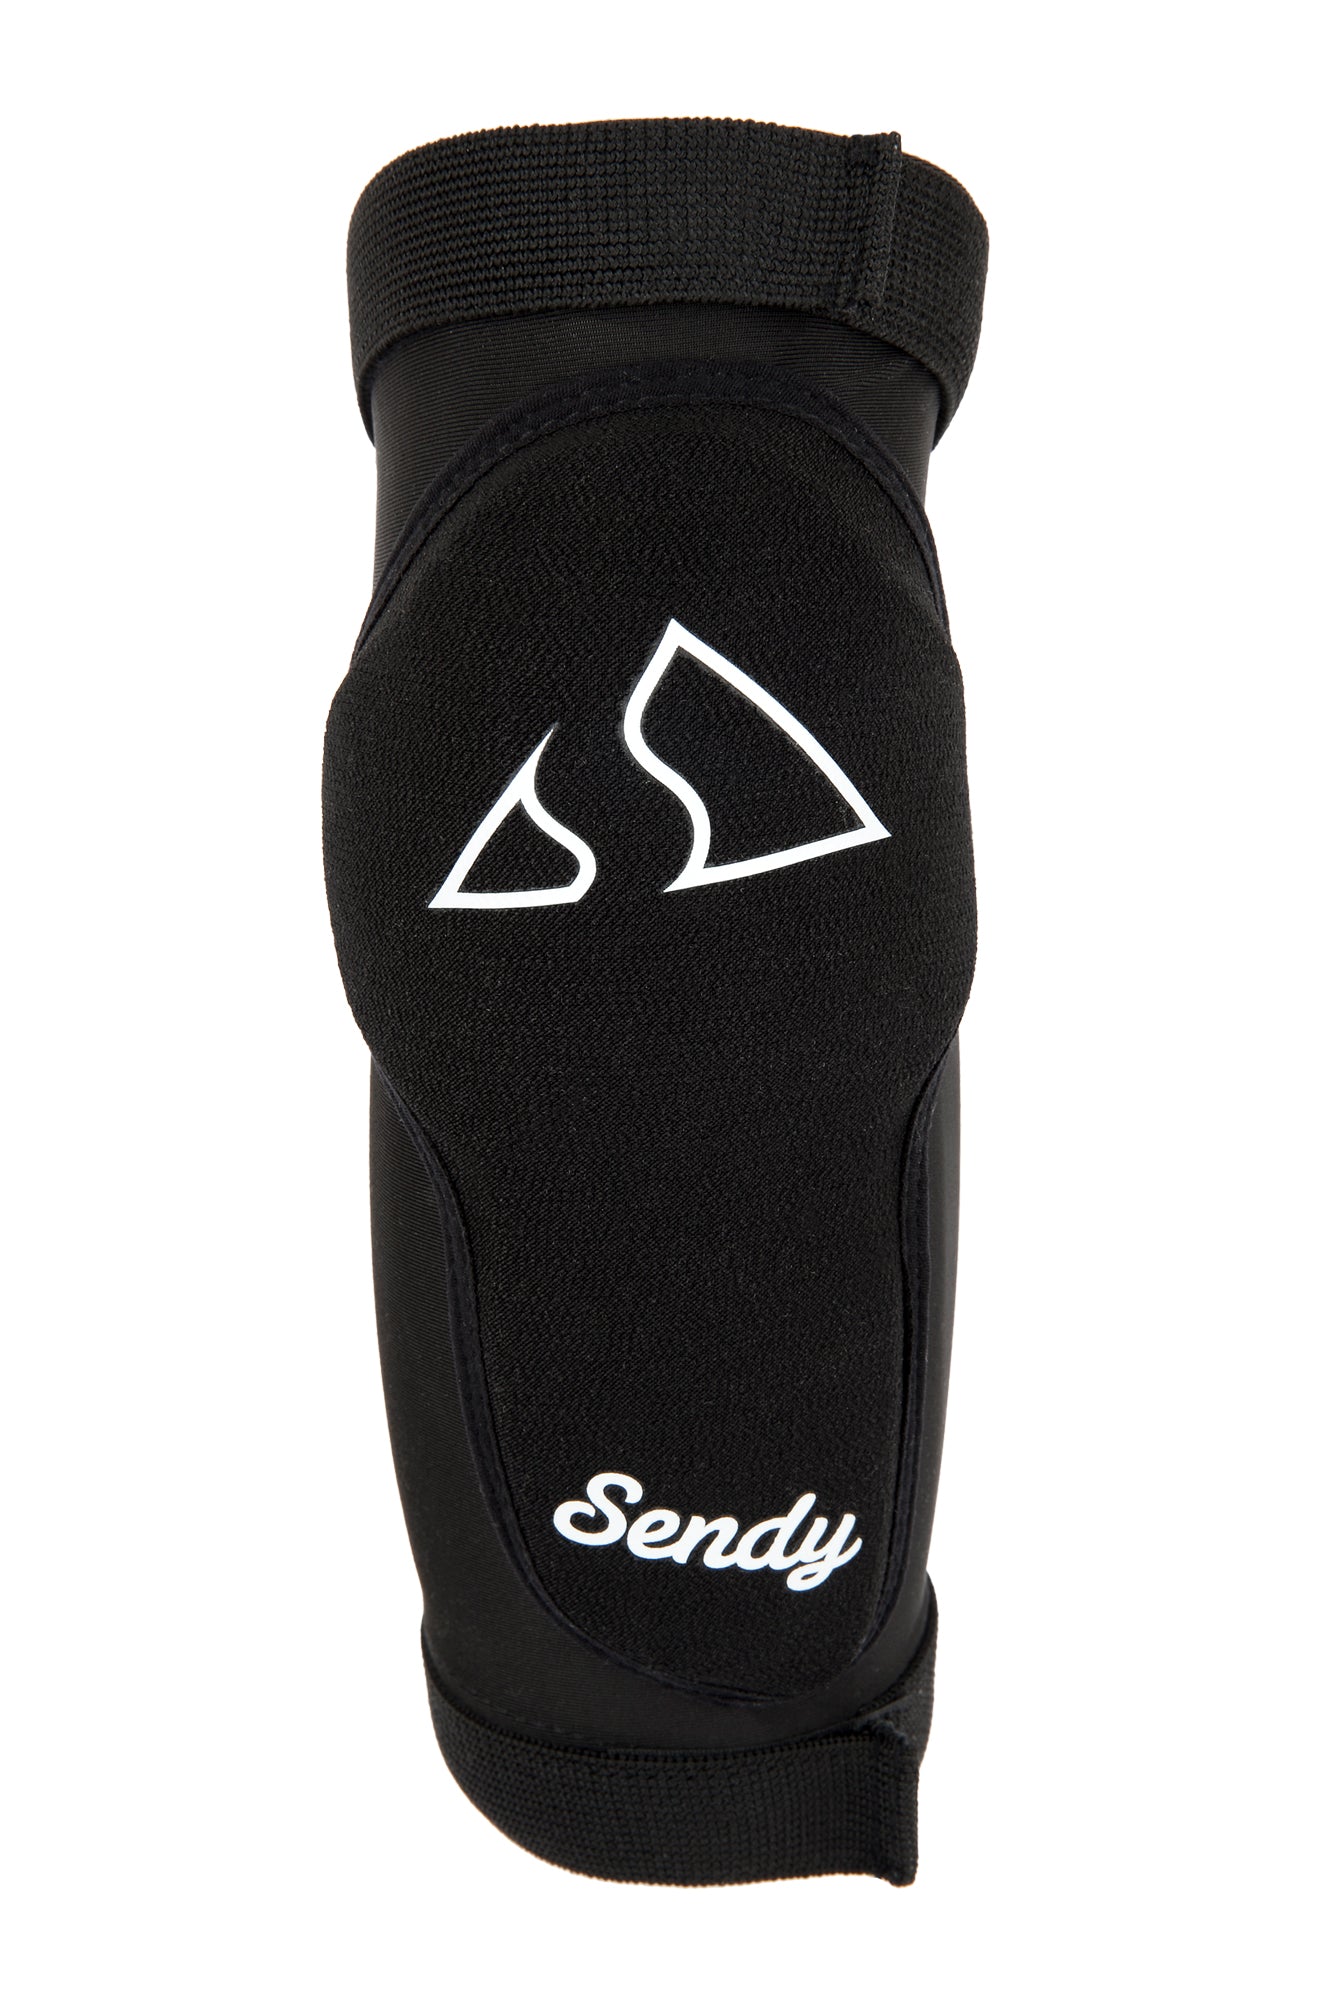 Kids MTB Knee Pads, Affordable Quality Protection